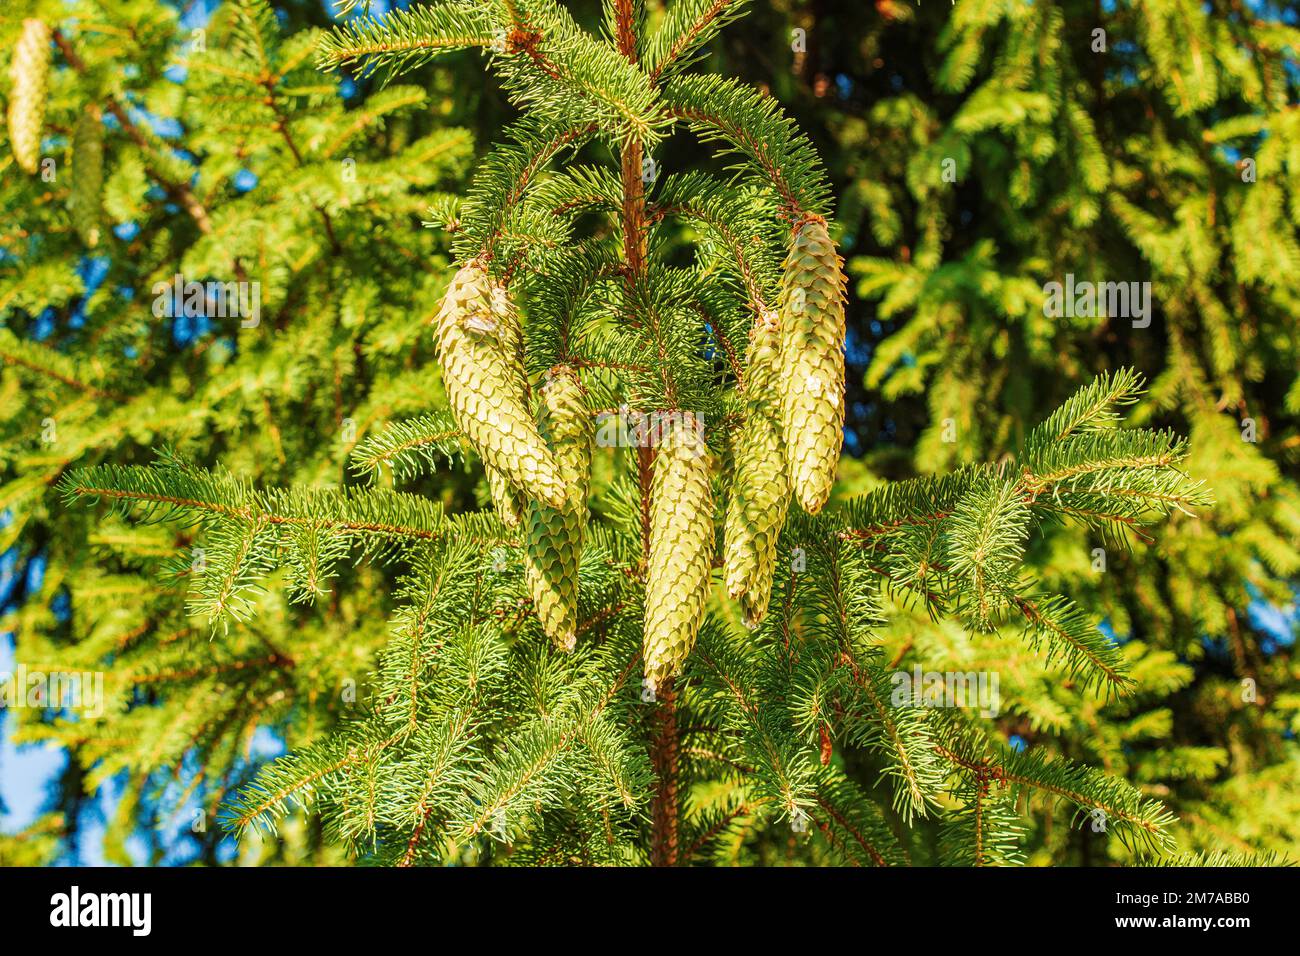 Fresh green cones of European spruce or Picea abies in Latin on the branches. Stock Photo